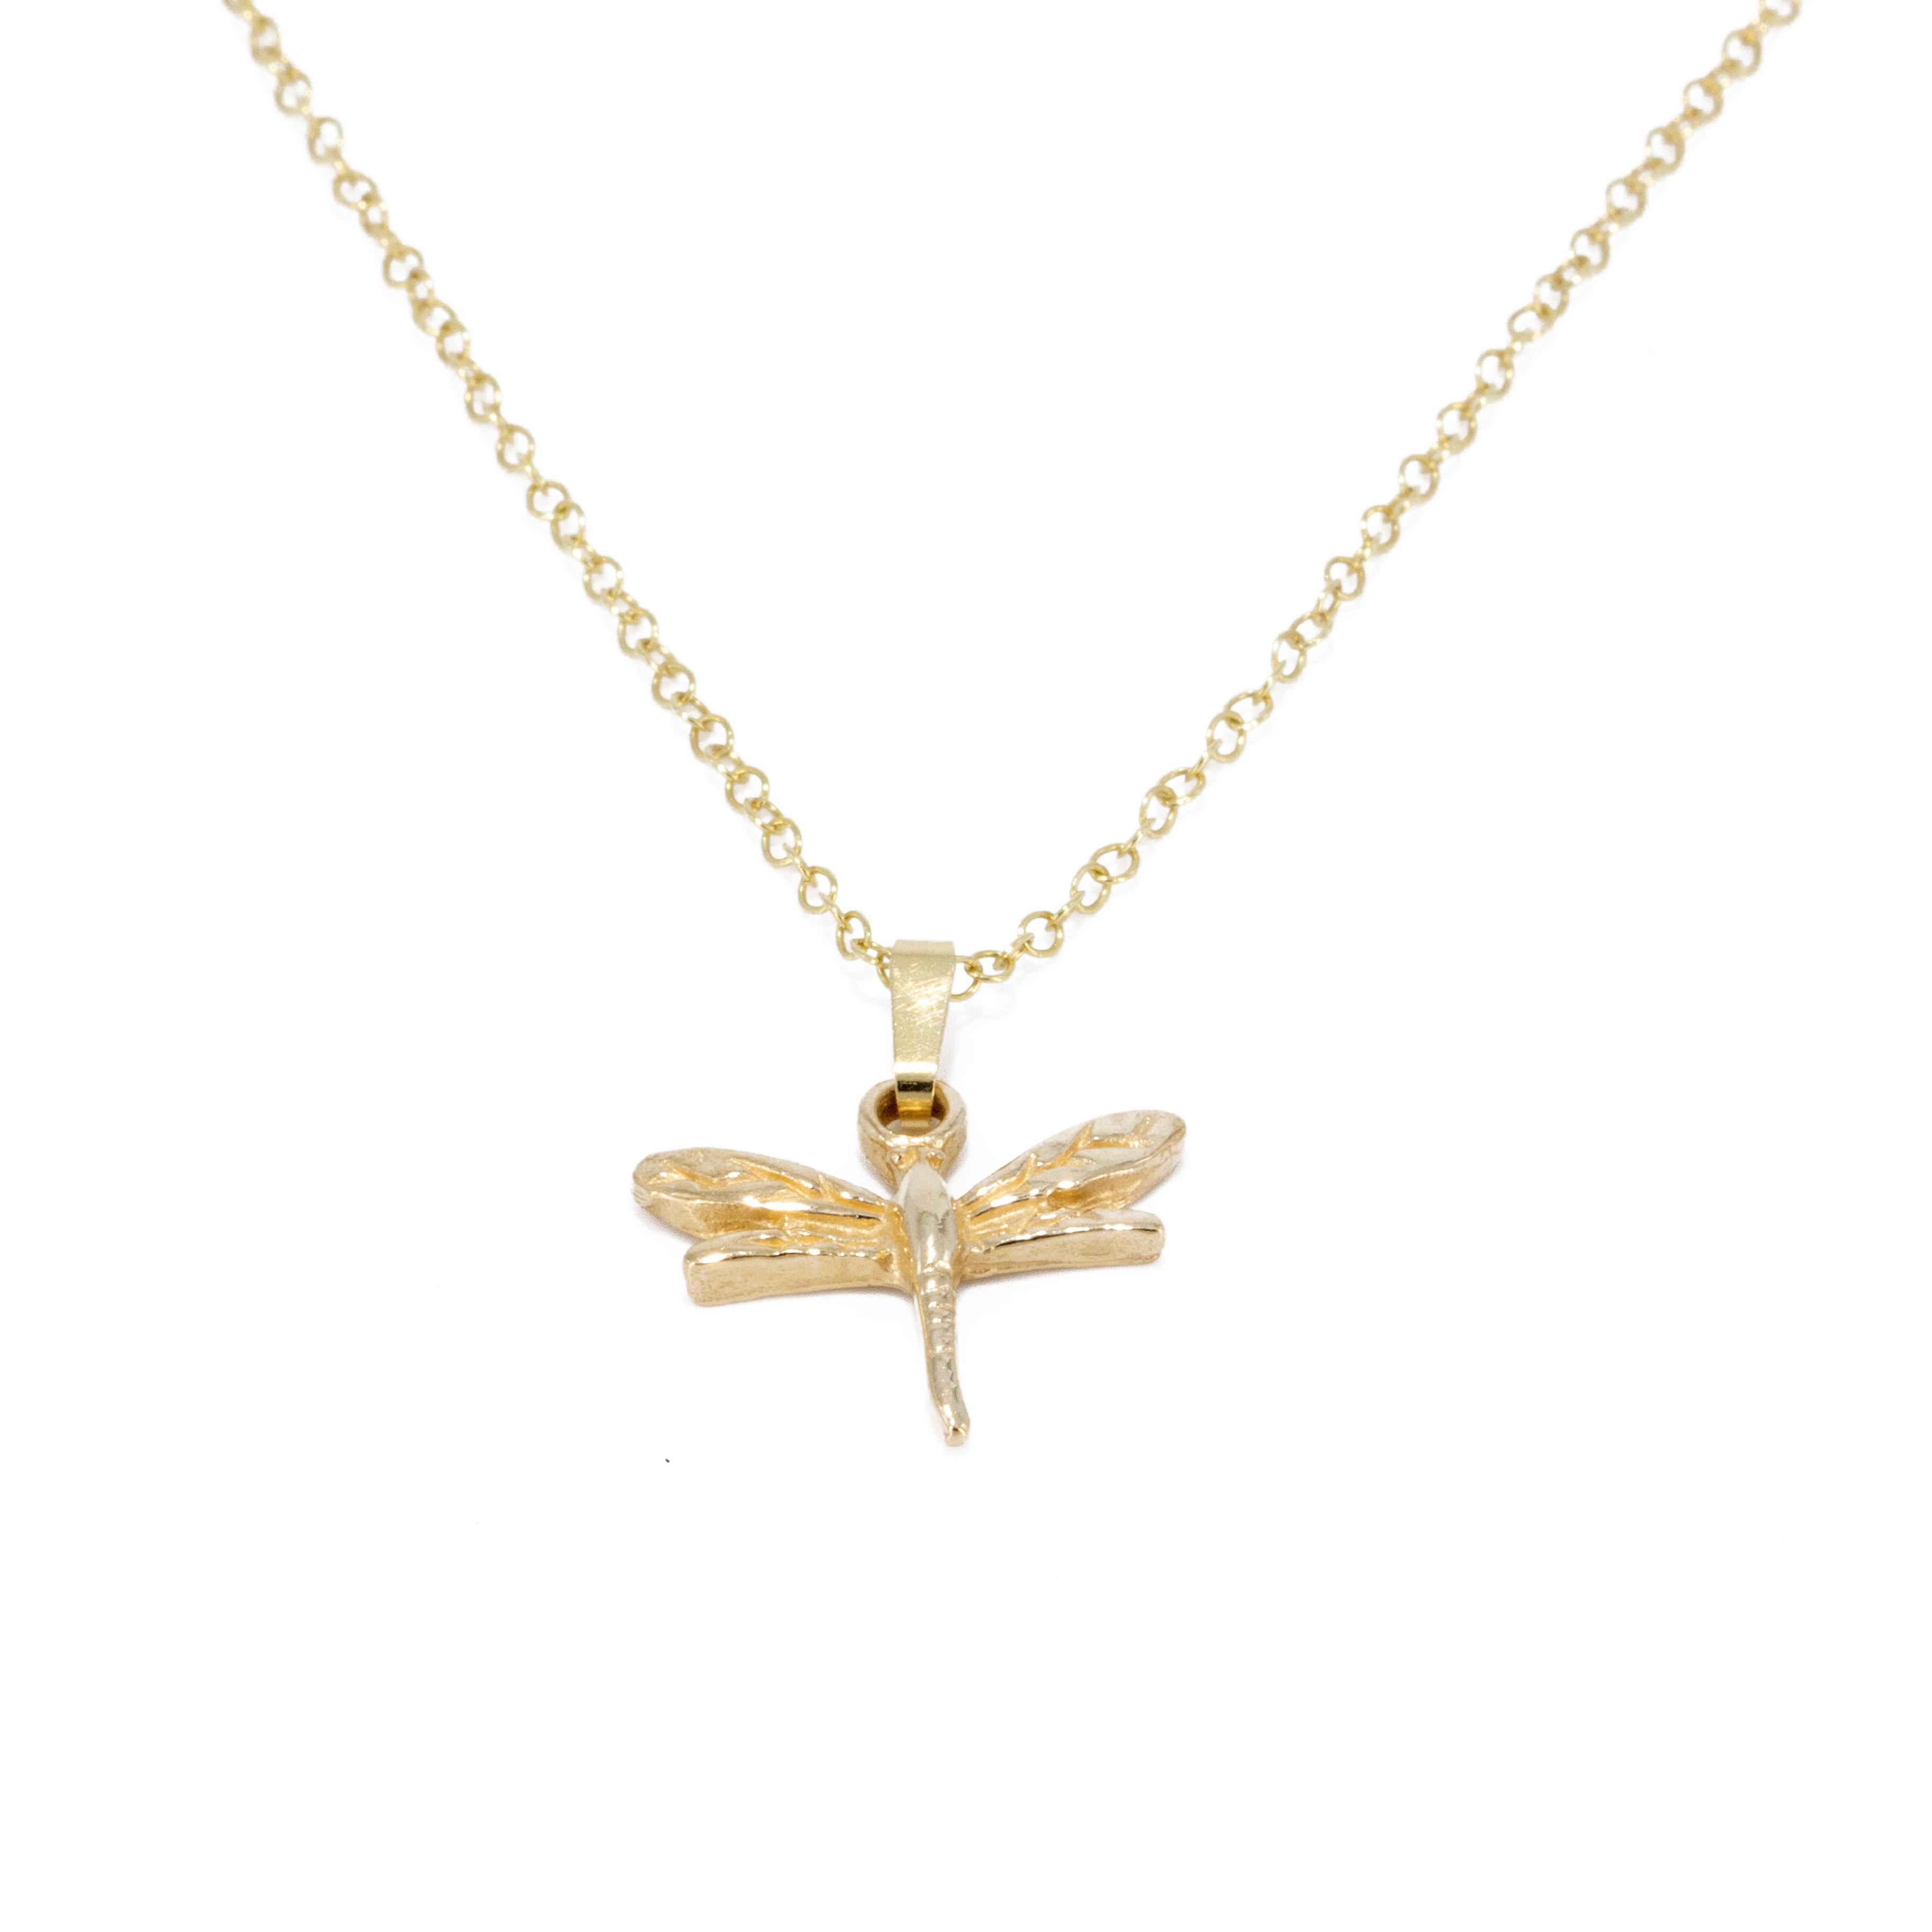 Dragonfly Pendant or Necklace in Solid 9 Karat Gold For Sale